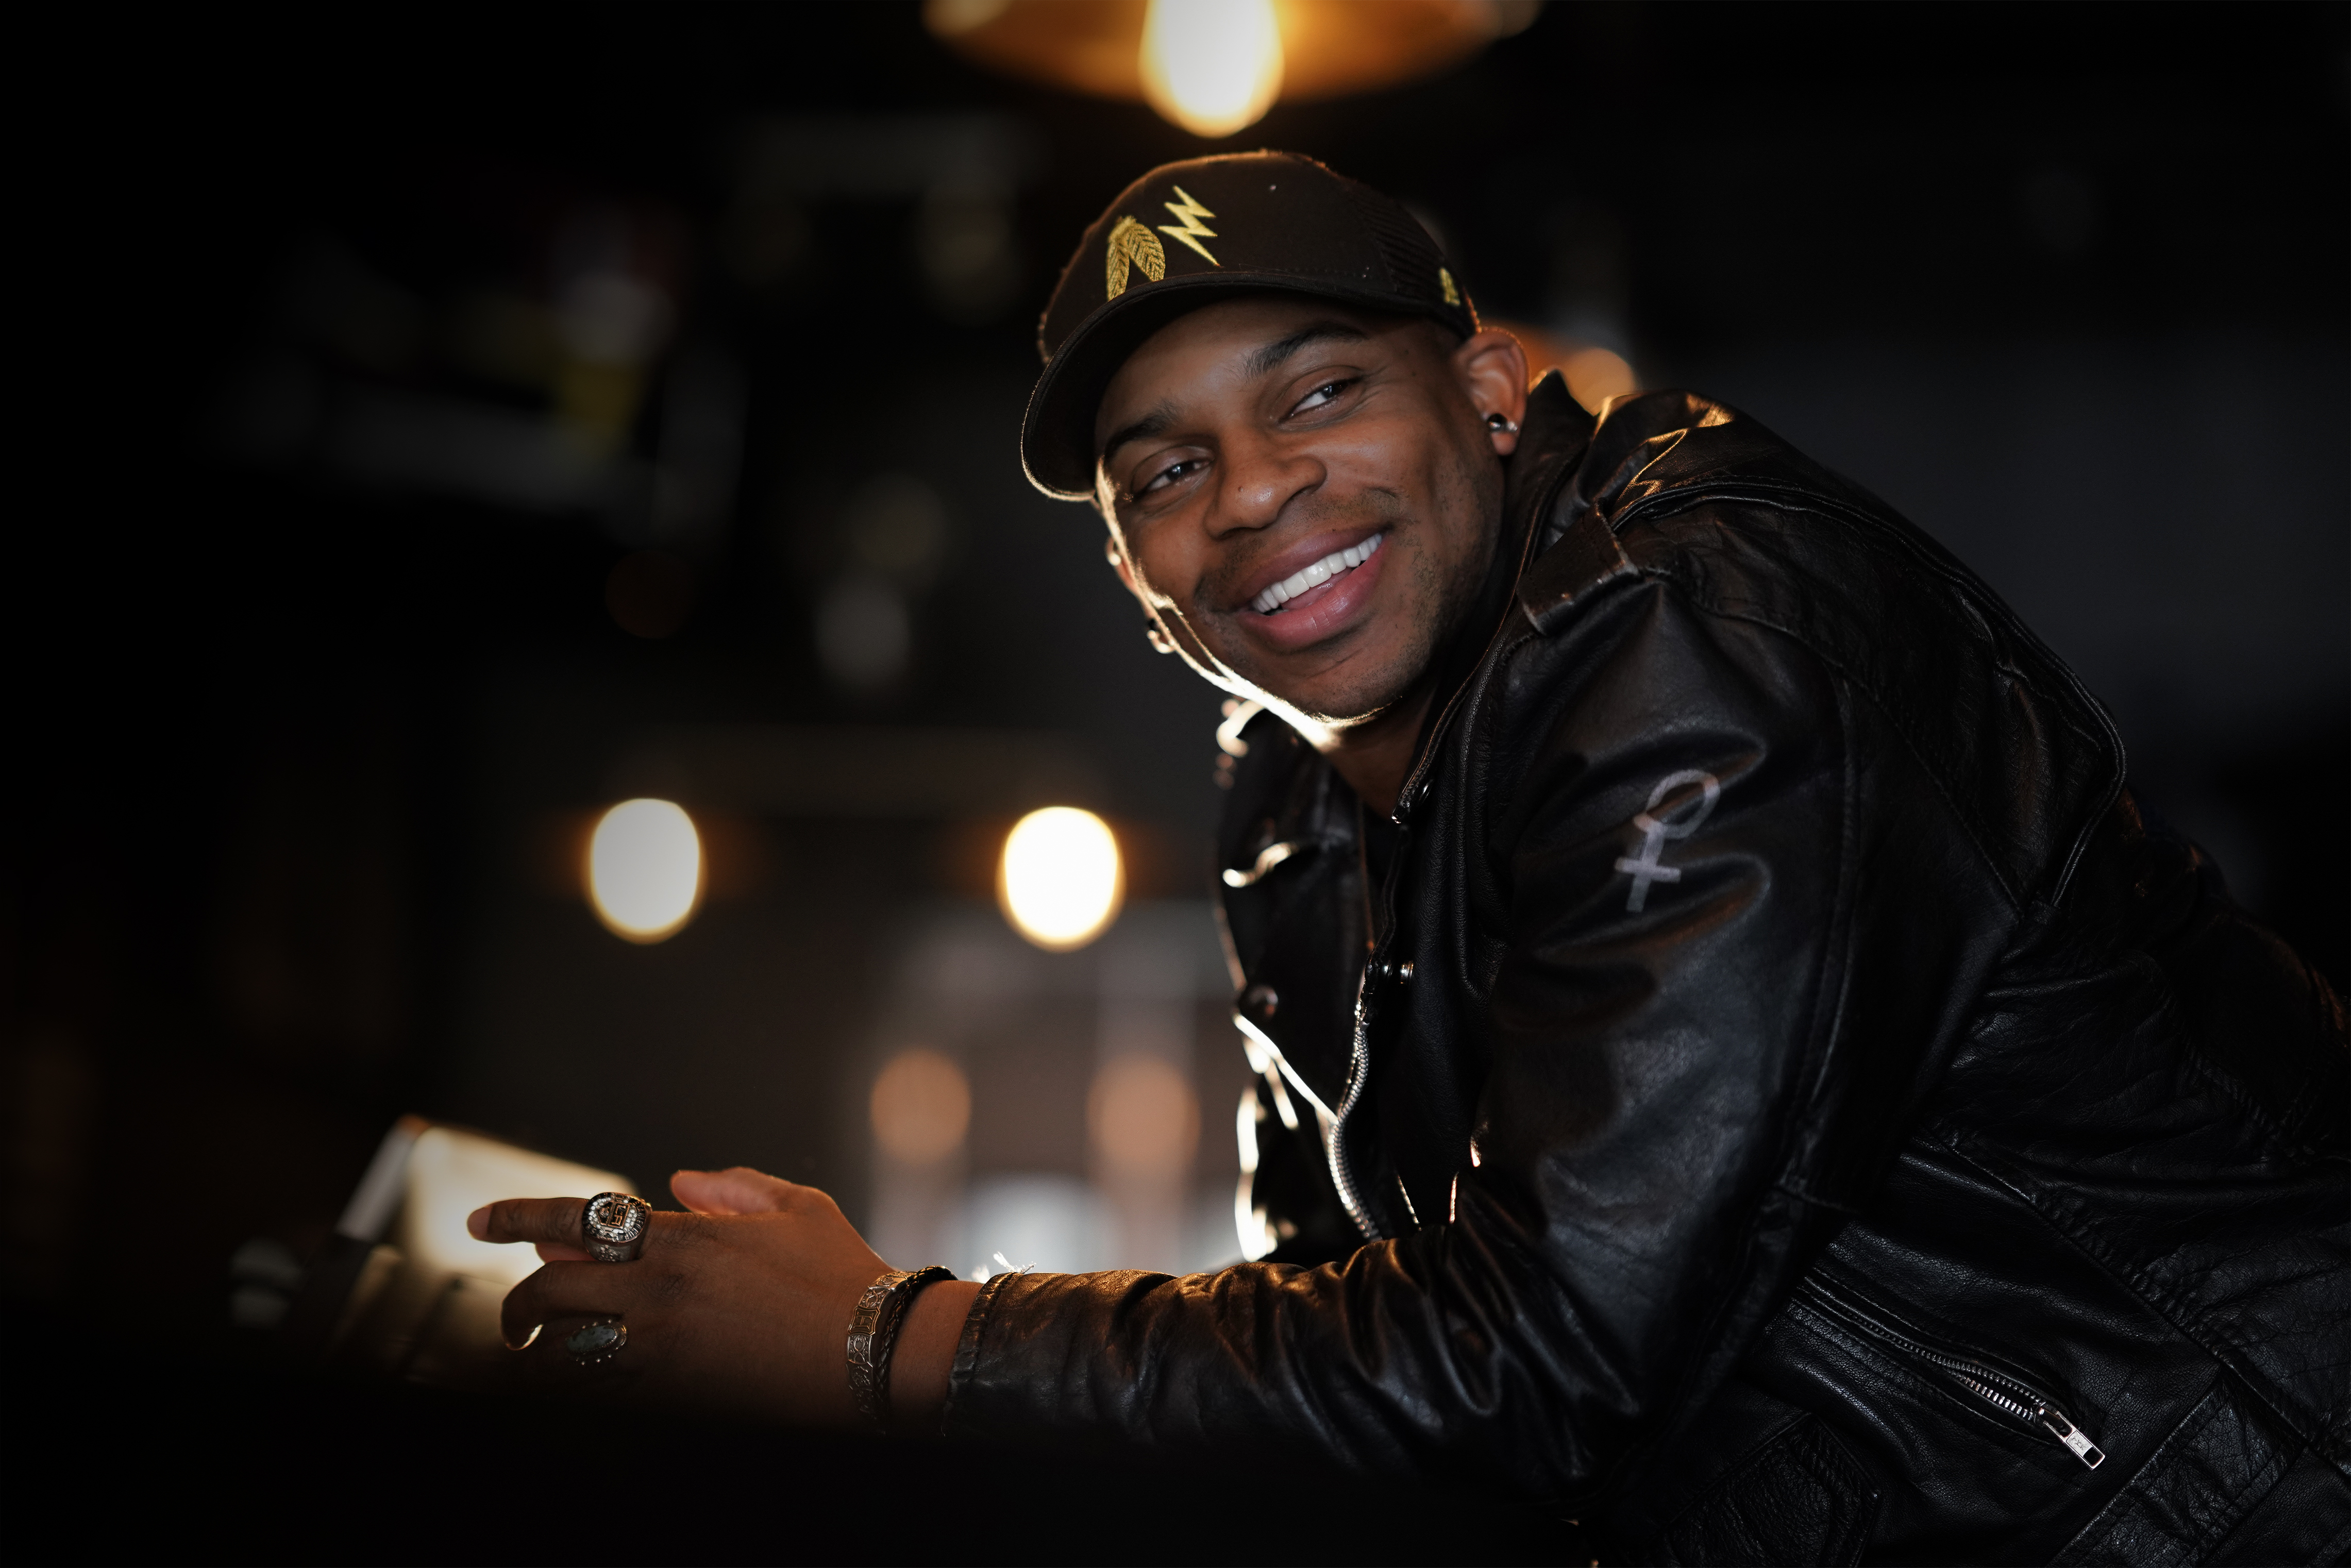 Jimmie Allen’s “Make Me Want To” Goes No. 1